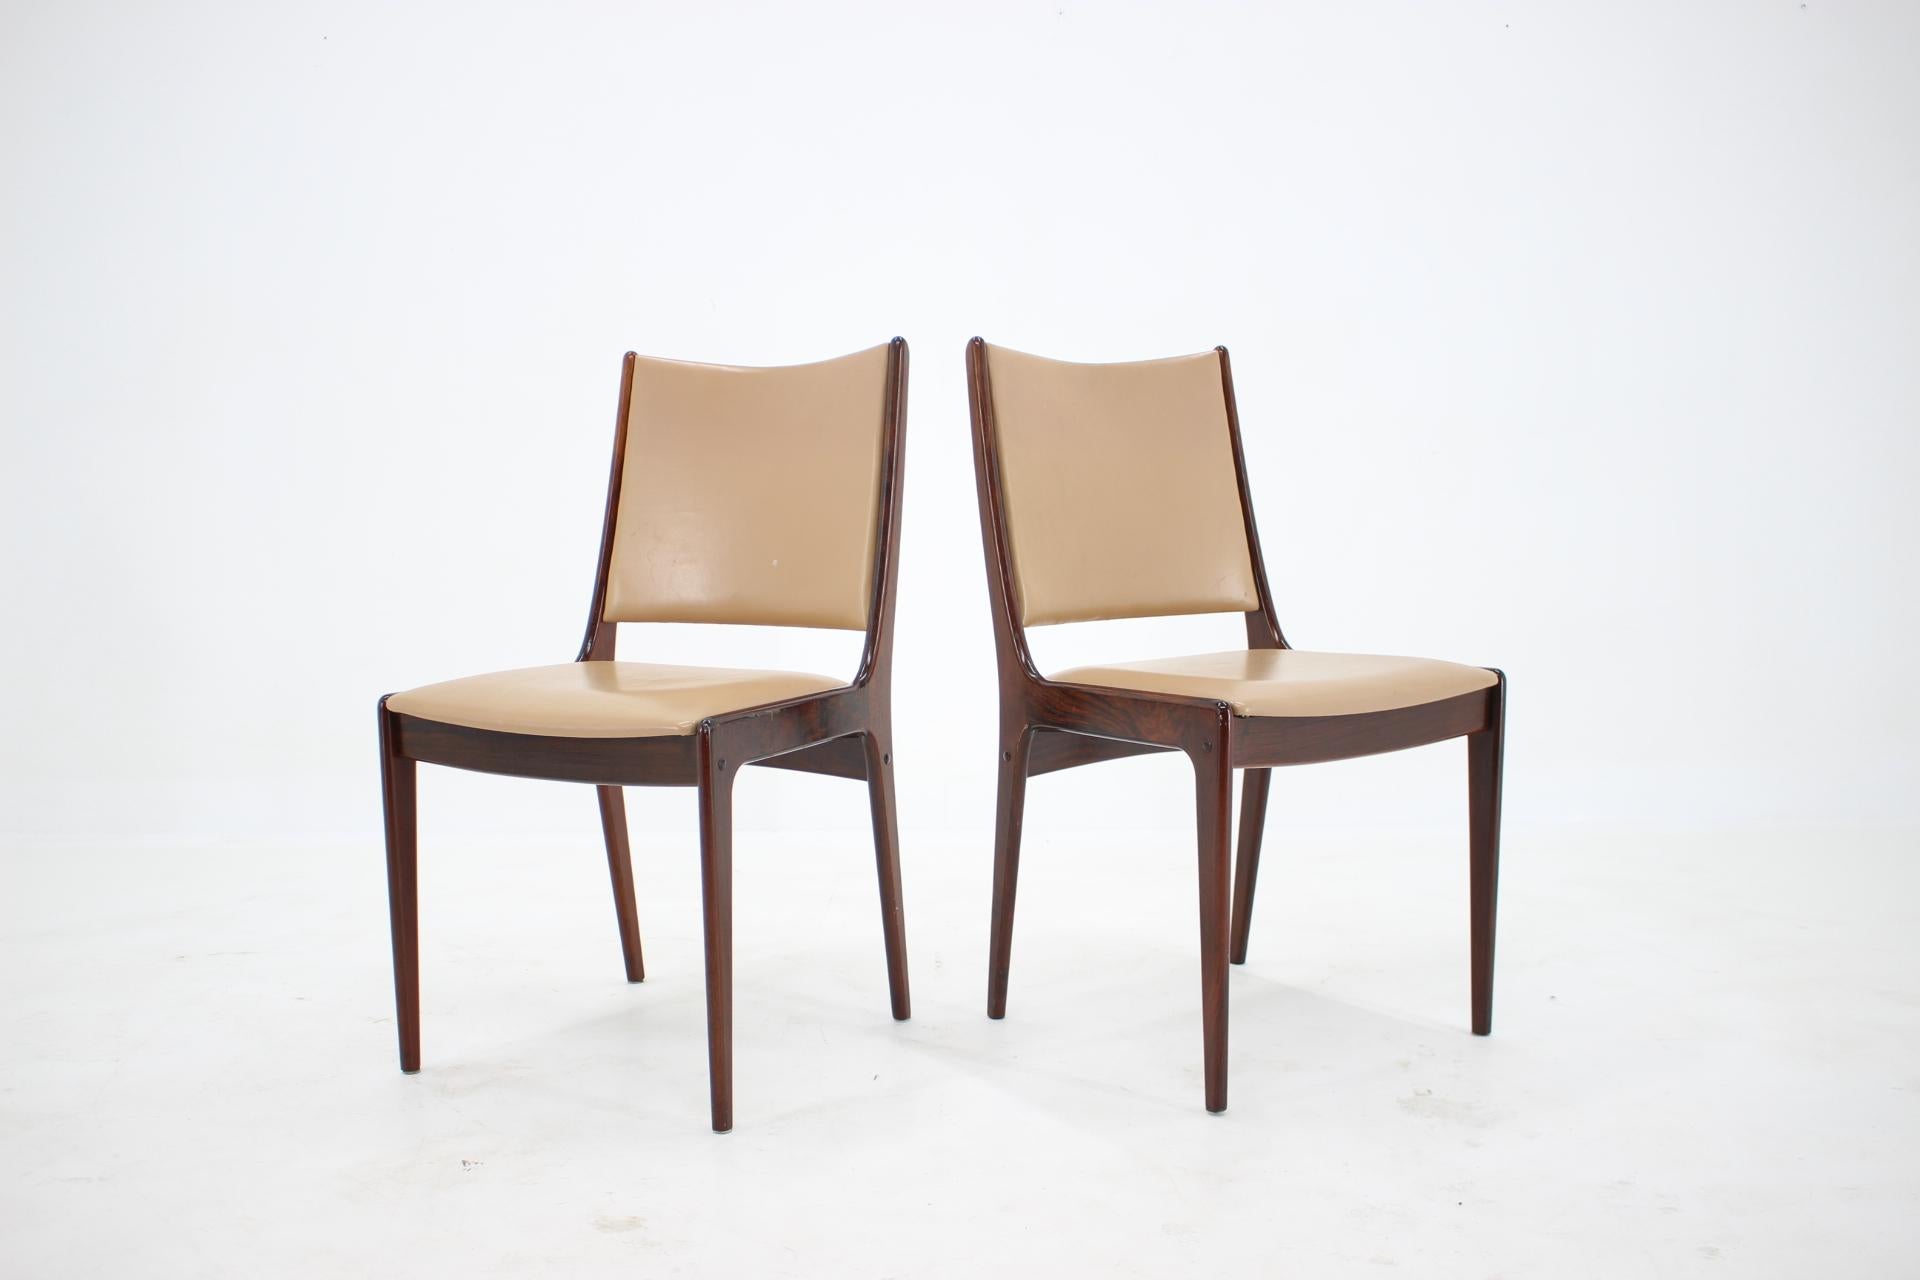 Mid-20th Century 1960s Johannes Andersen Teak Dining Chairs in Leatherette, Set of 4